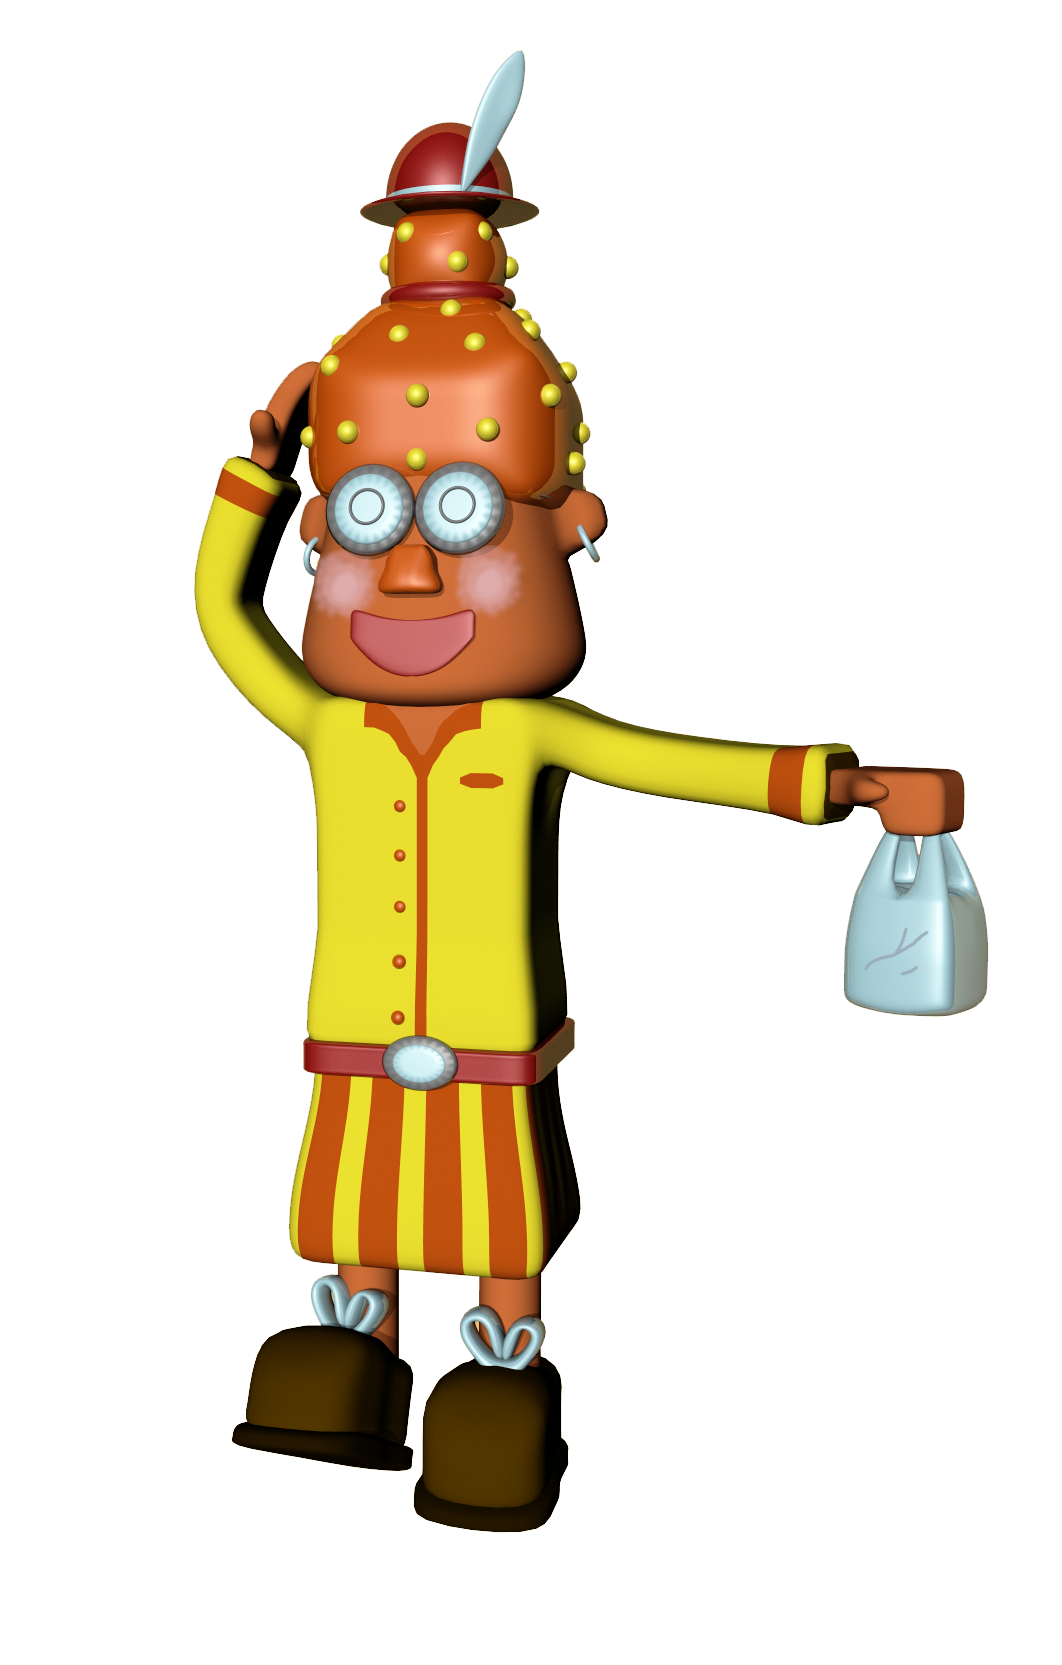 Stylized 3D character in a yellow and orange outfit with a plastic shopping bag